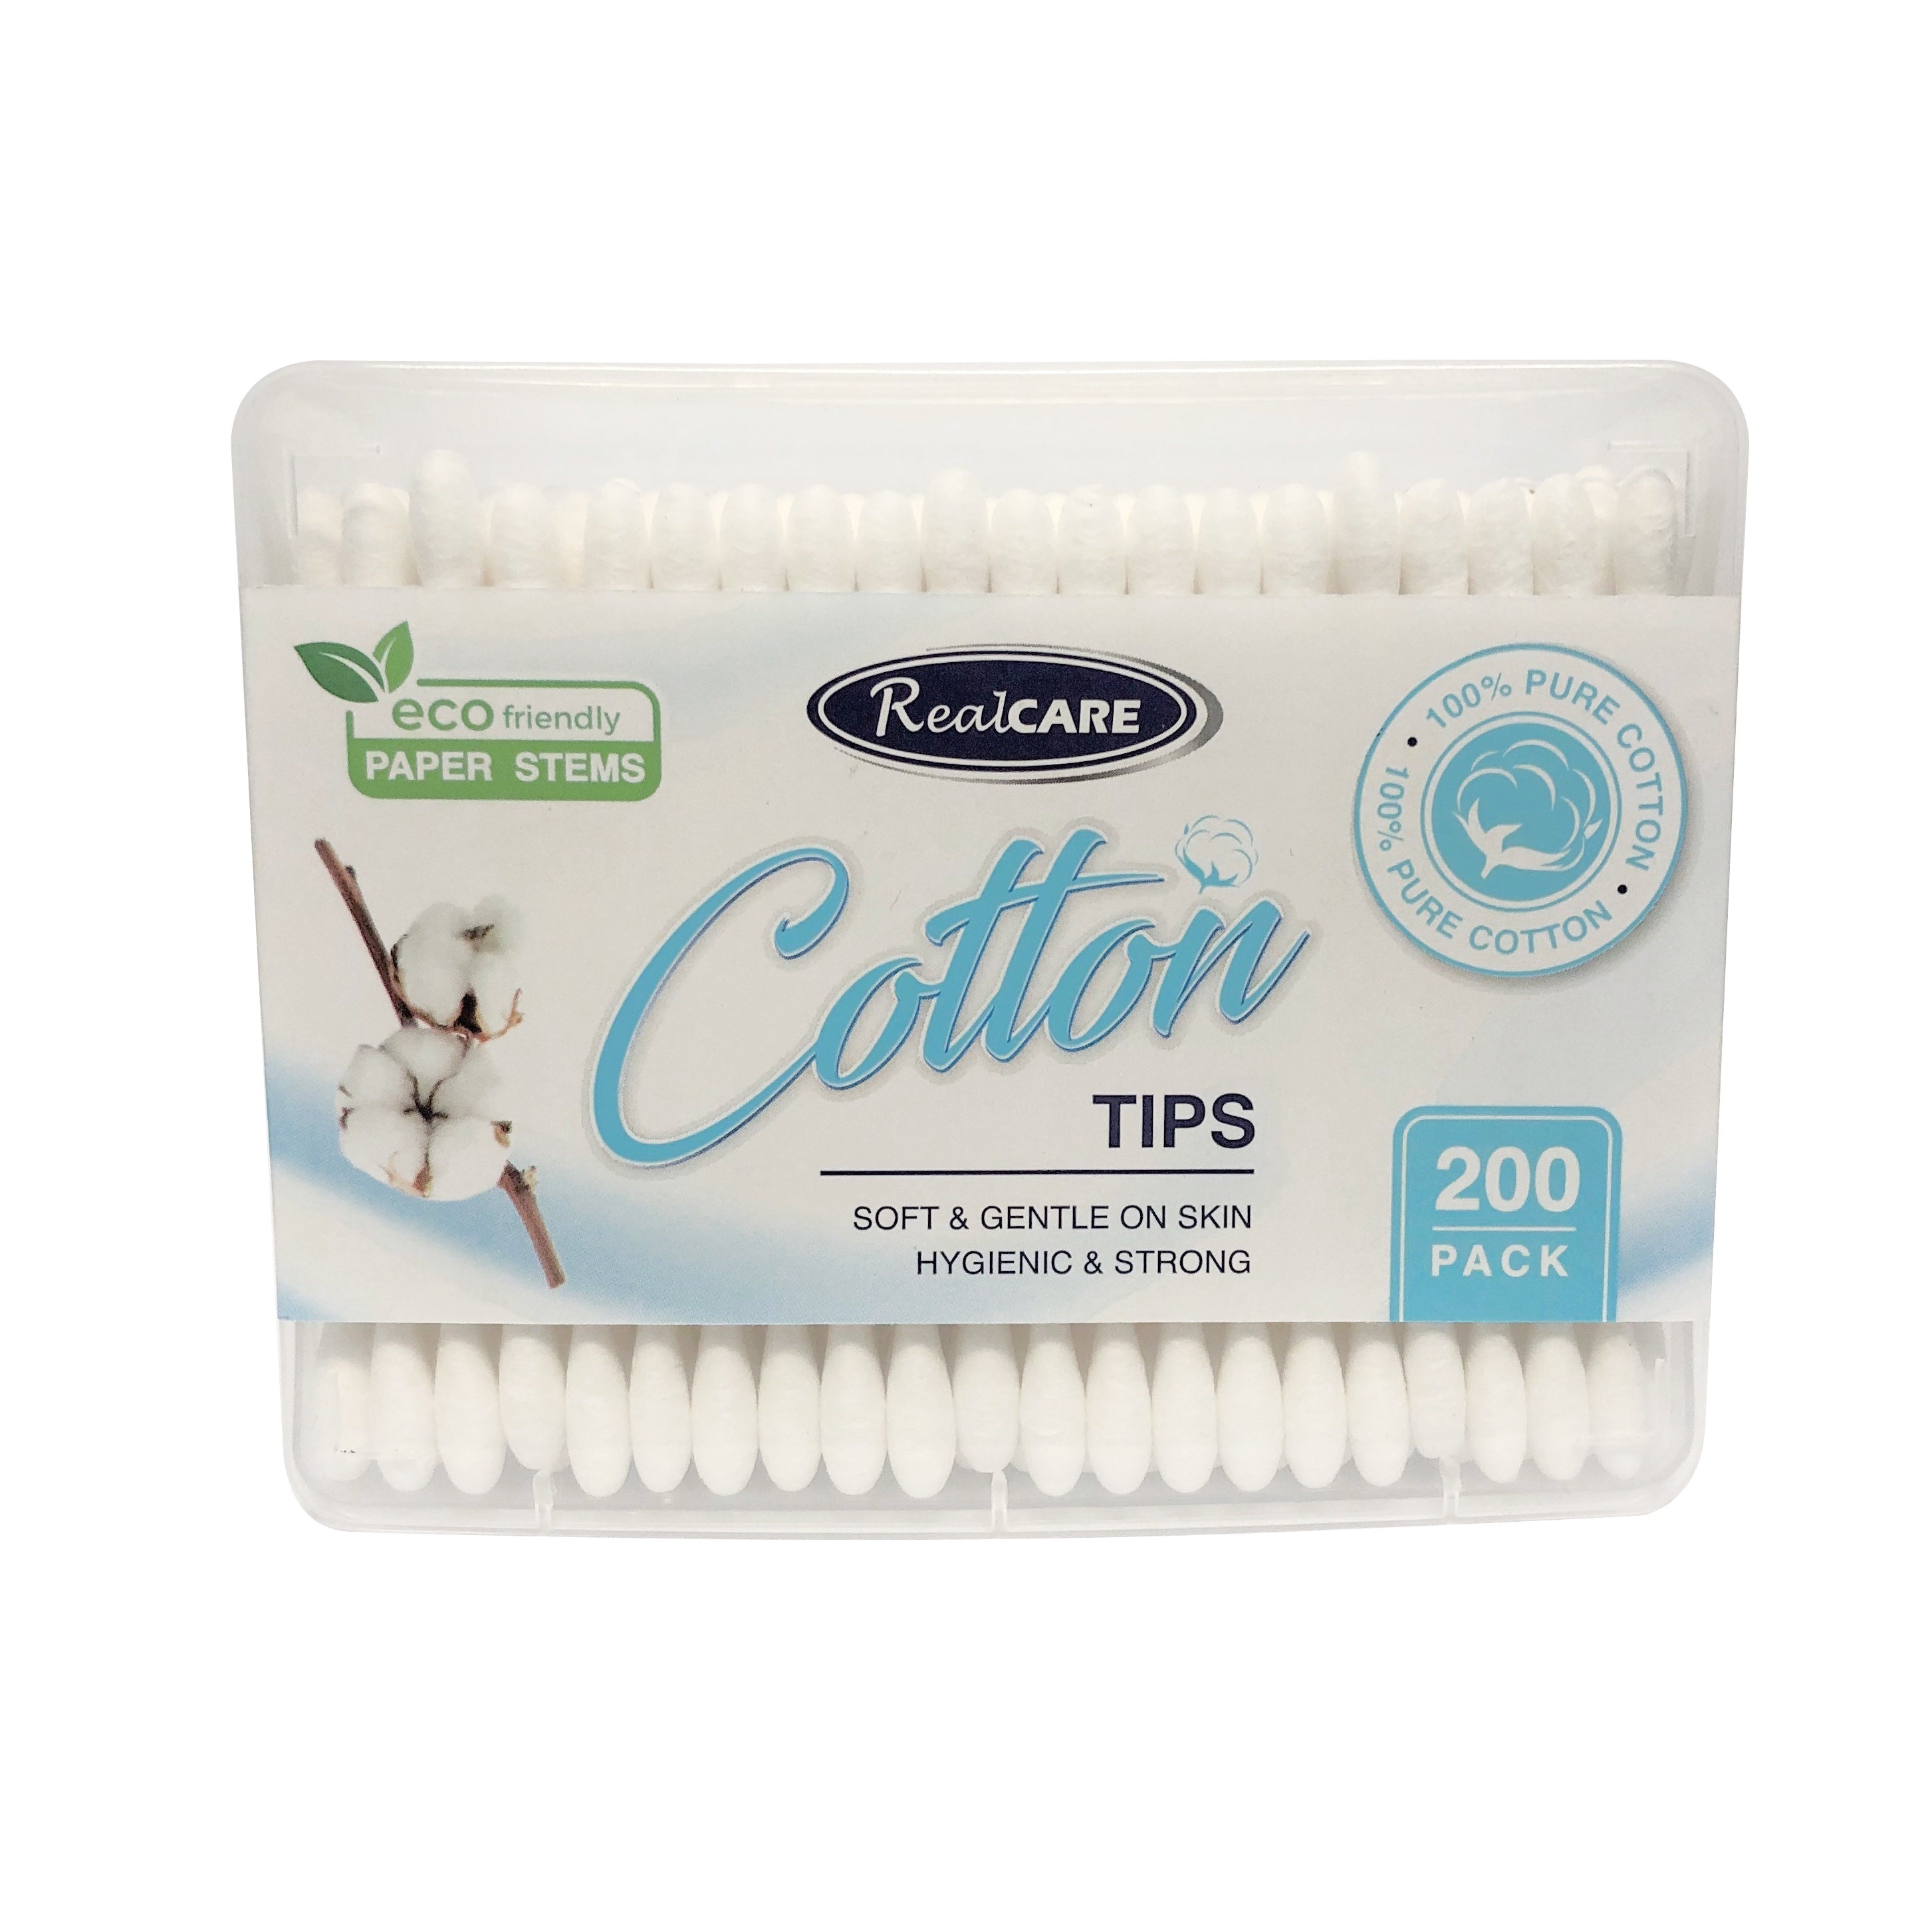 Real Care Environmentally friendly PAPER STEM Cotton Tips 200pk